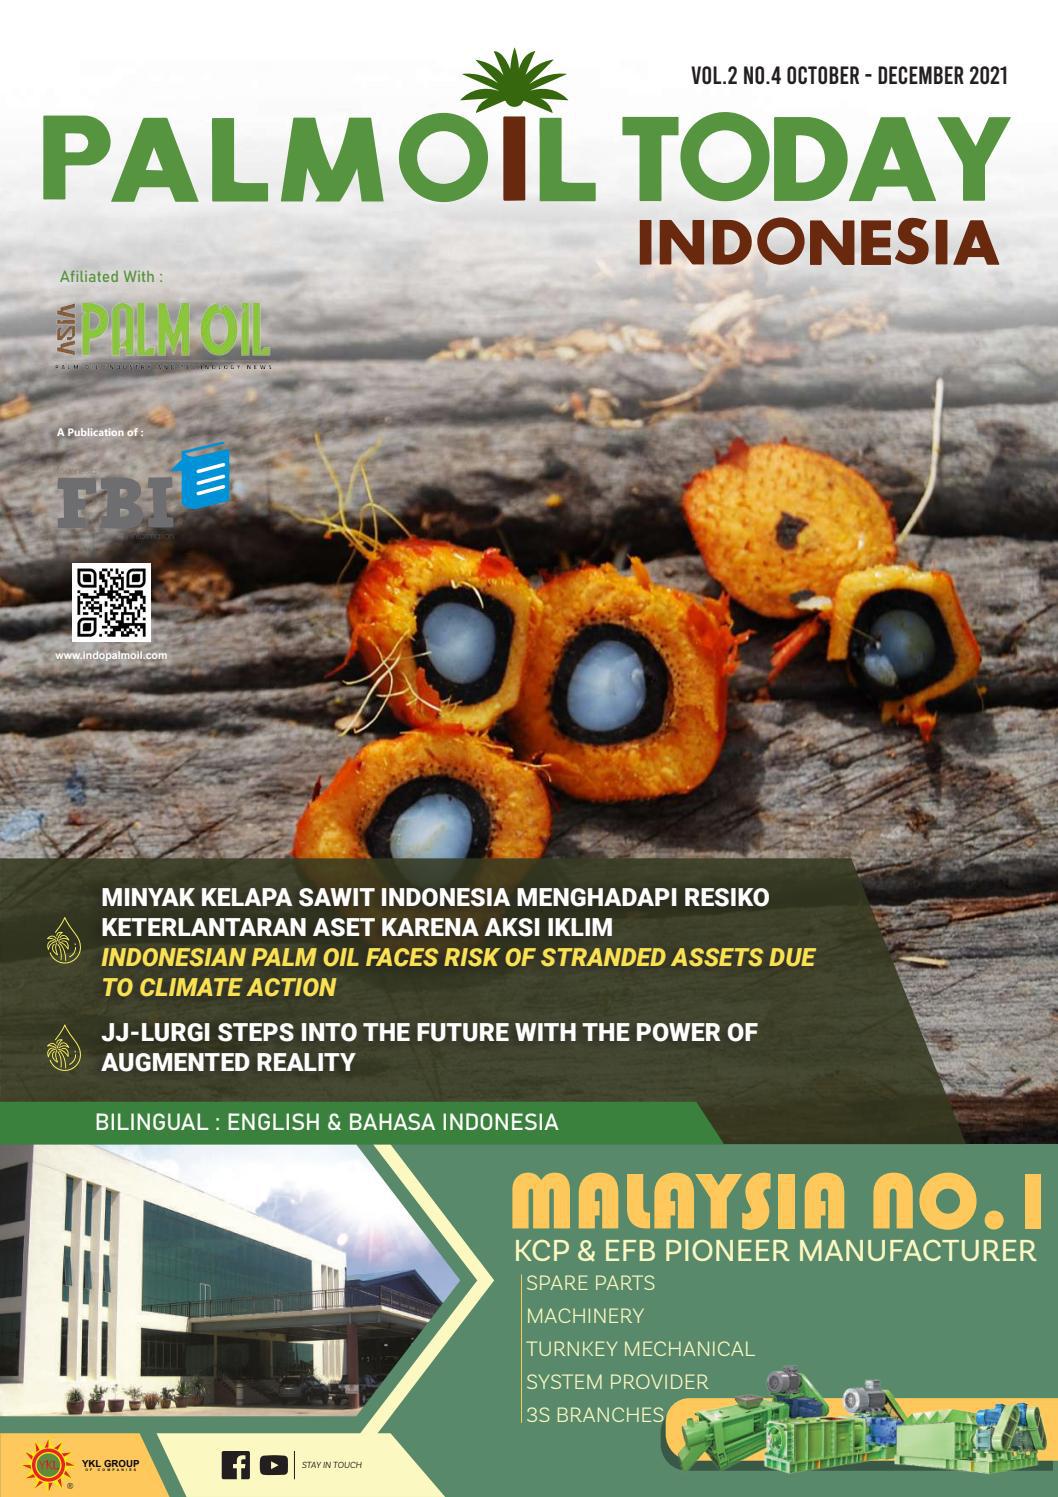 Palm Oil Today Indonesia Magazine Vol.2 №4 - October - December 2021